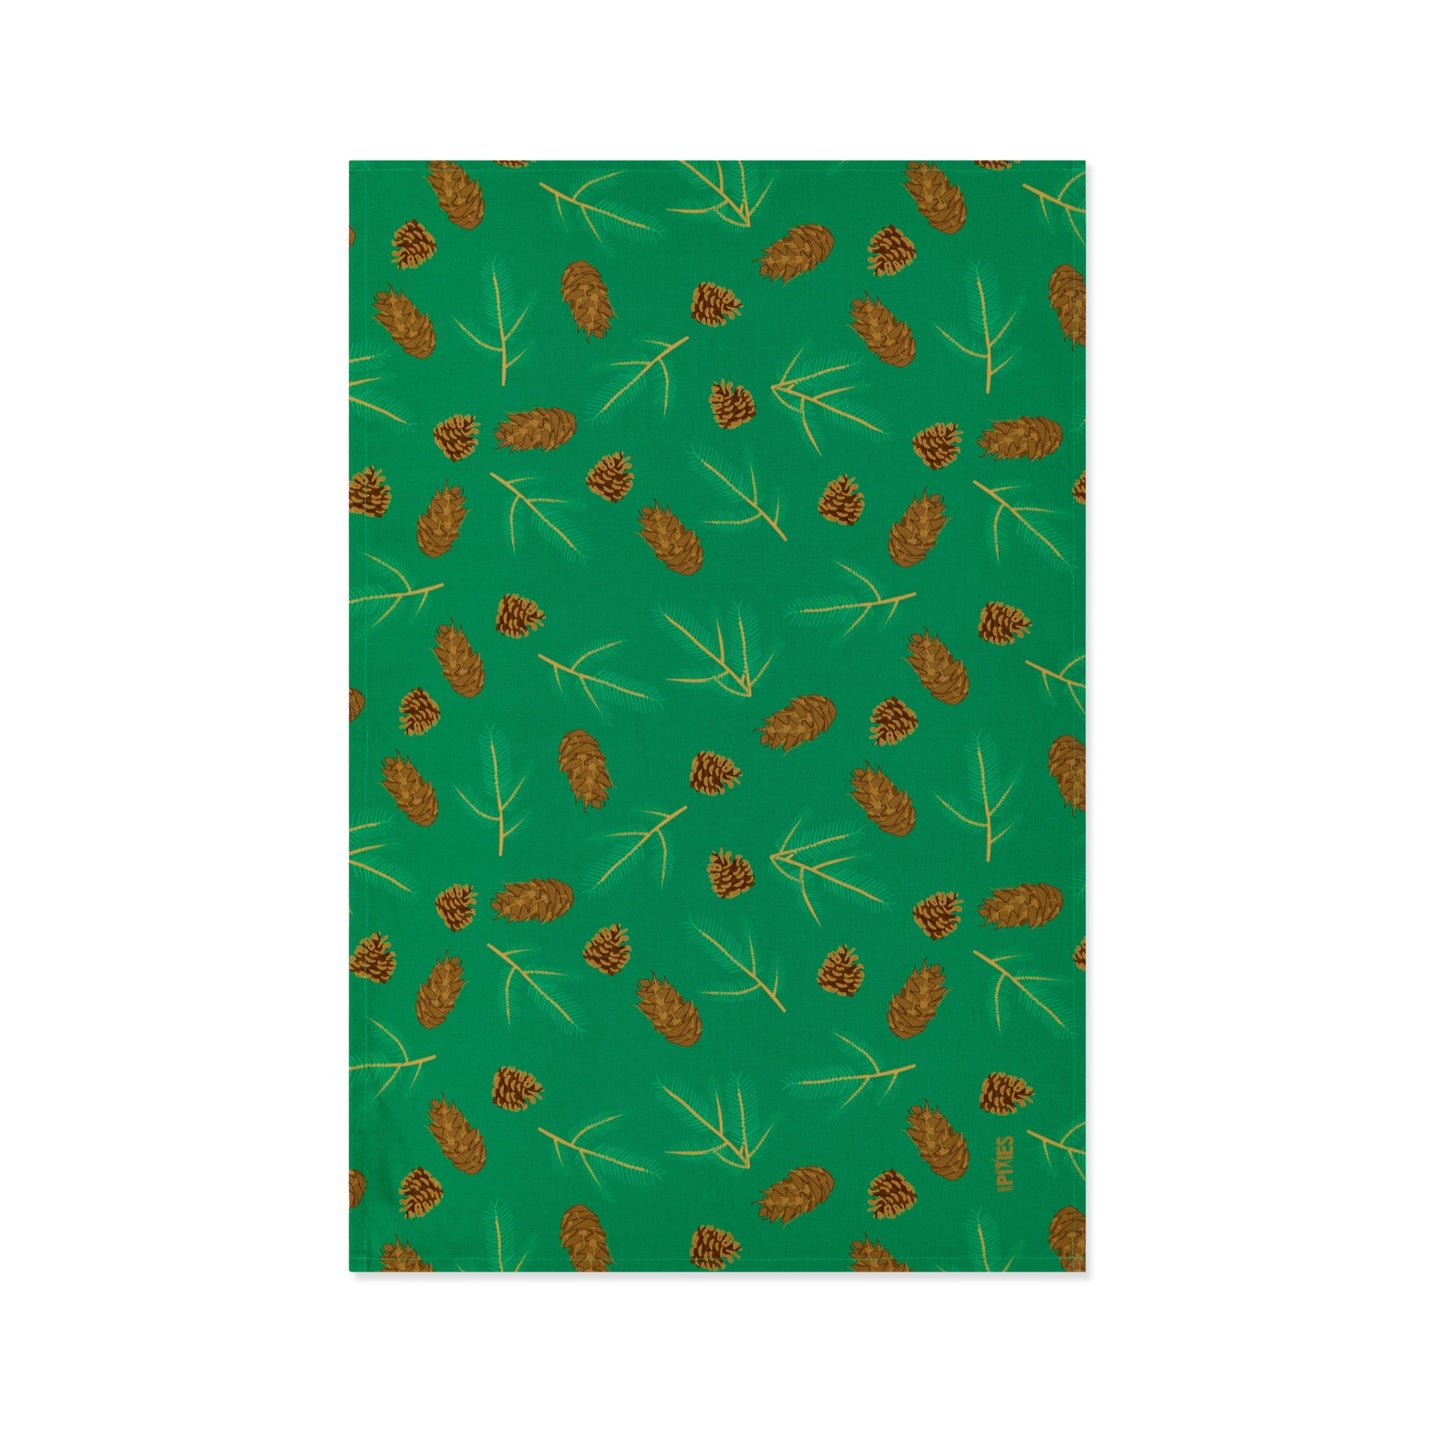 Green Organic Cotton Tea Towel with illustrated Douglas fir cones and spruce sprigs